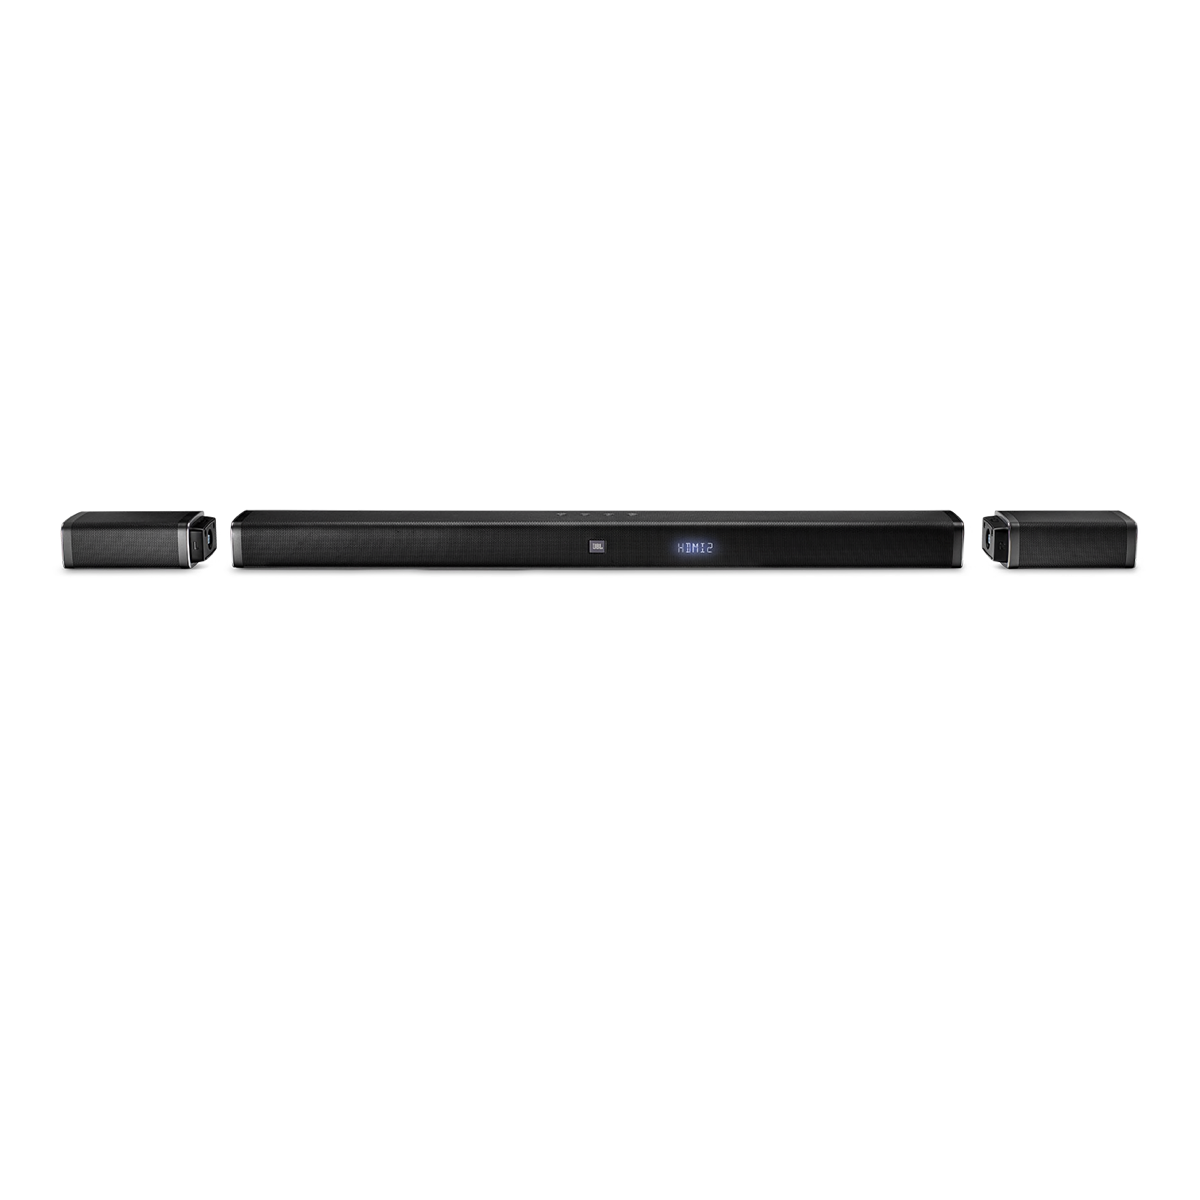 JBL Bar 5.1 - Soundbar and Subwoofer System with Detachachable Surrounds - AVStore